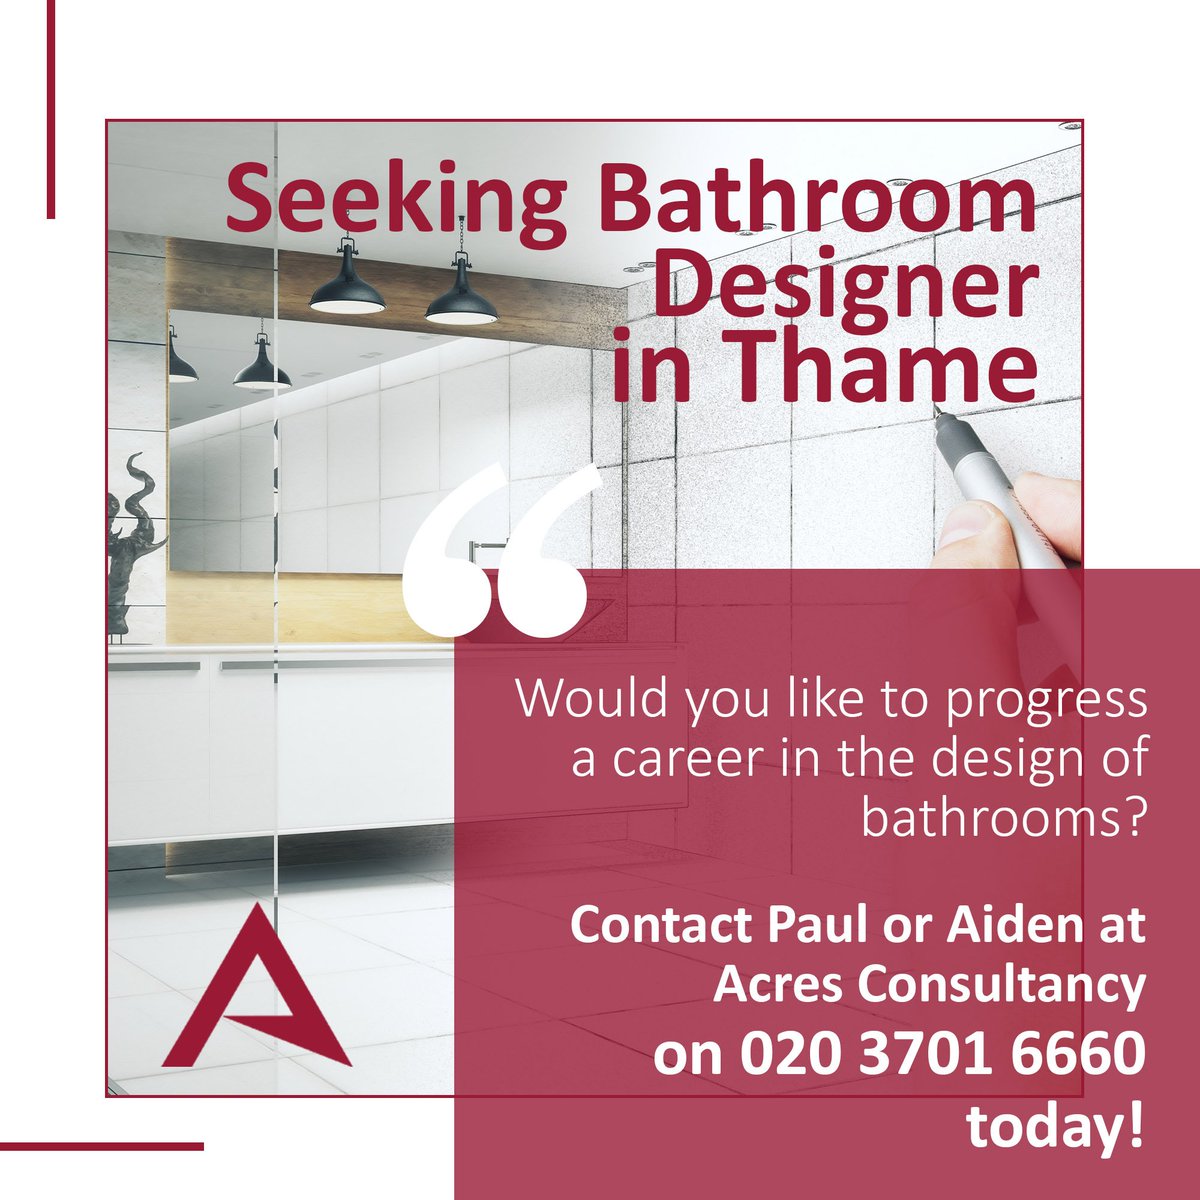 Another great position is waiting for you. Call us today: 02037016660

#jobiswaiting, #kbsa, #bathroomdesigner,#thame, #jobinthame, #kbbindustry, #findajob